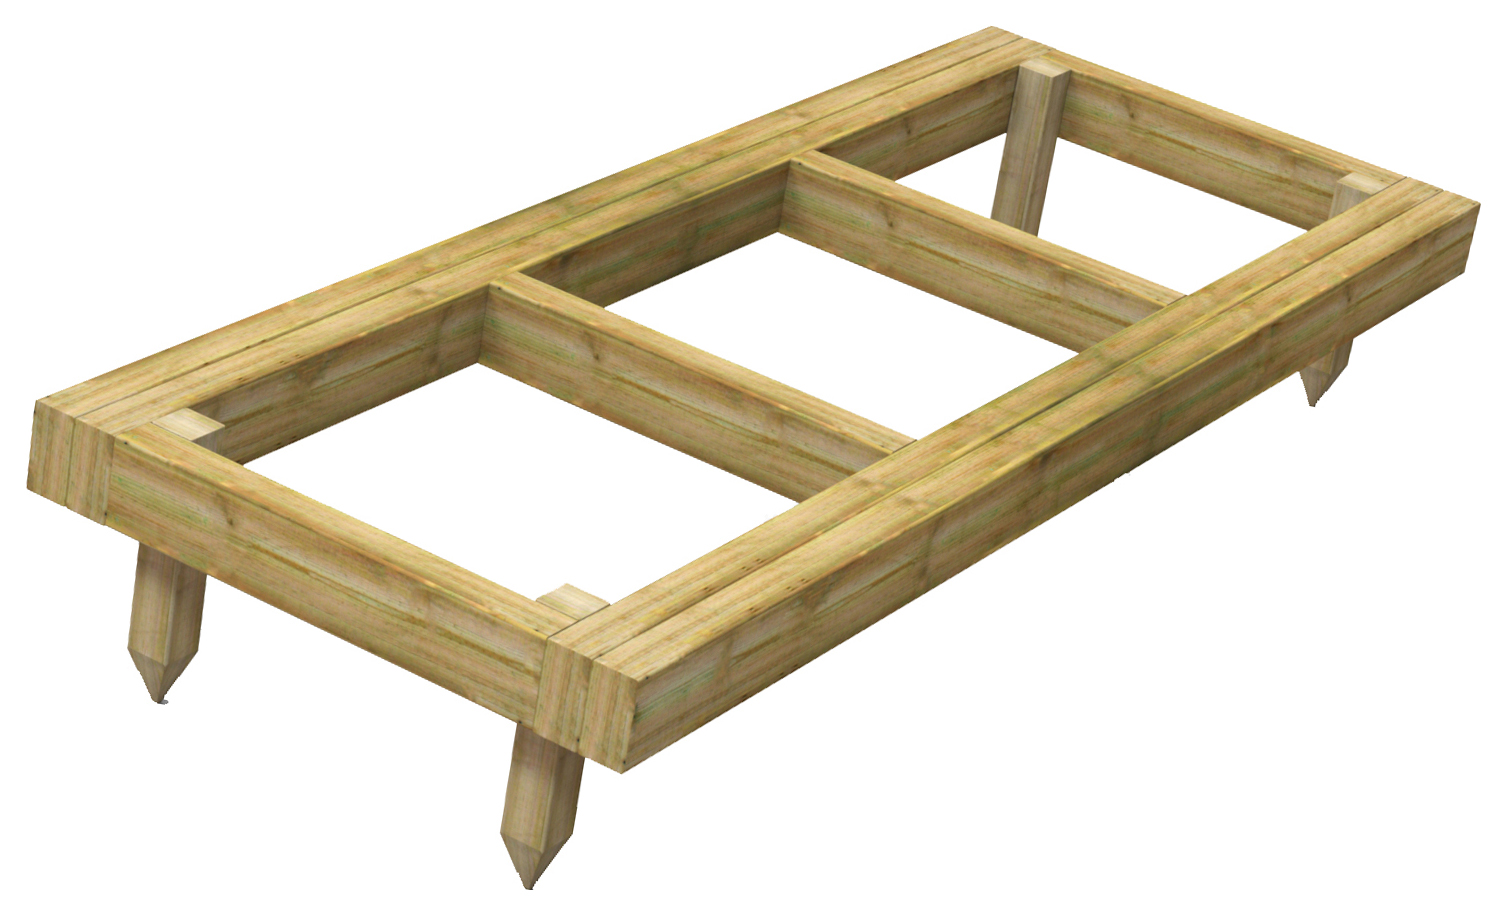 Power Sheds Pressure Treated Garden Building Base Kit - 2 x 6ft